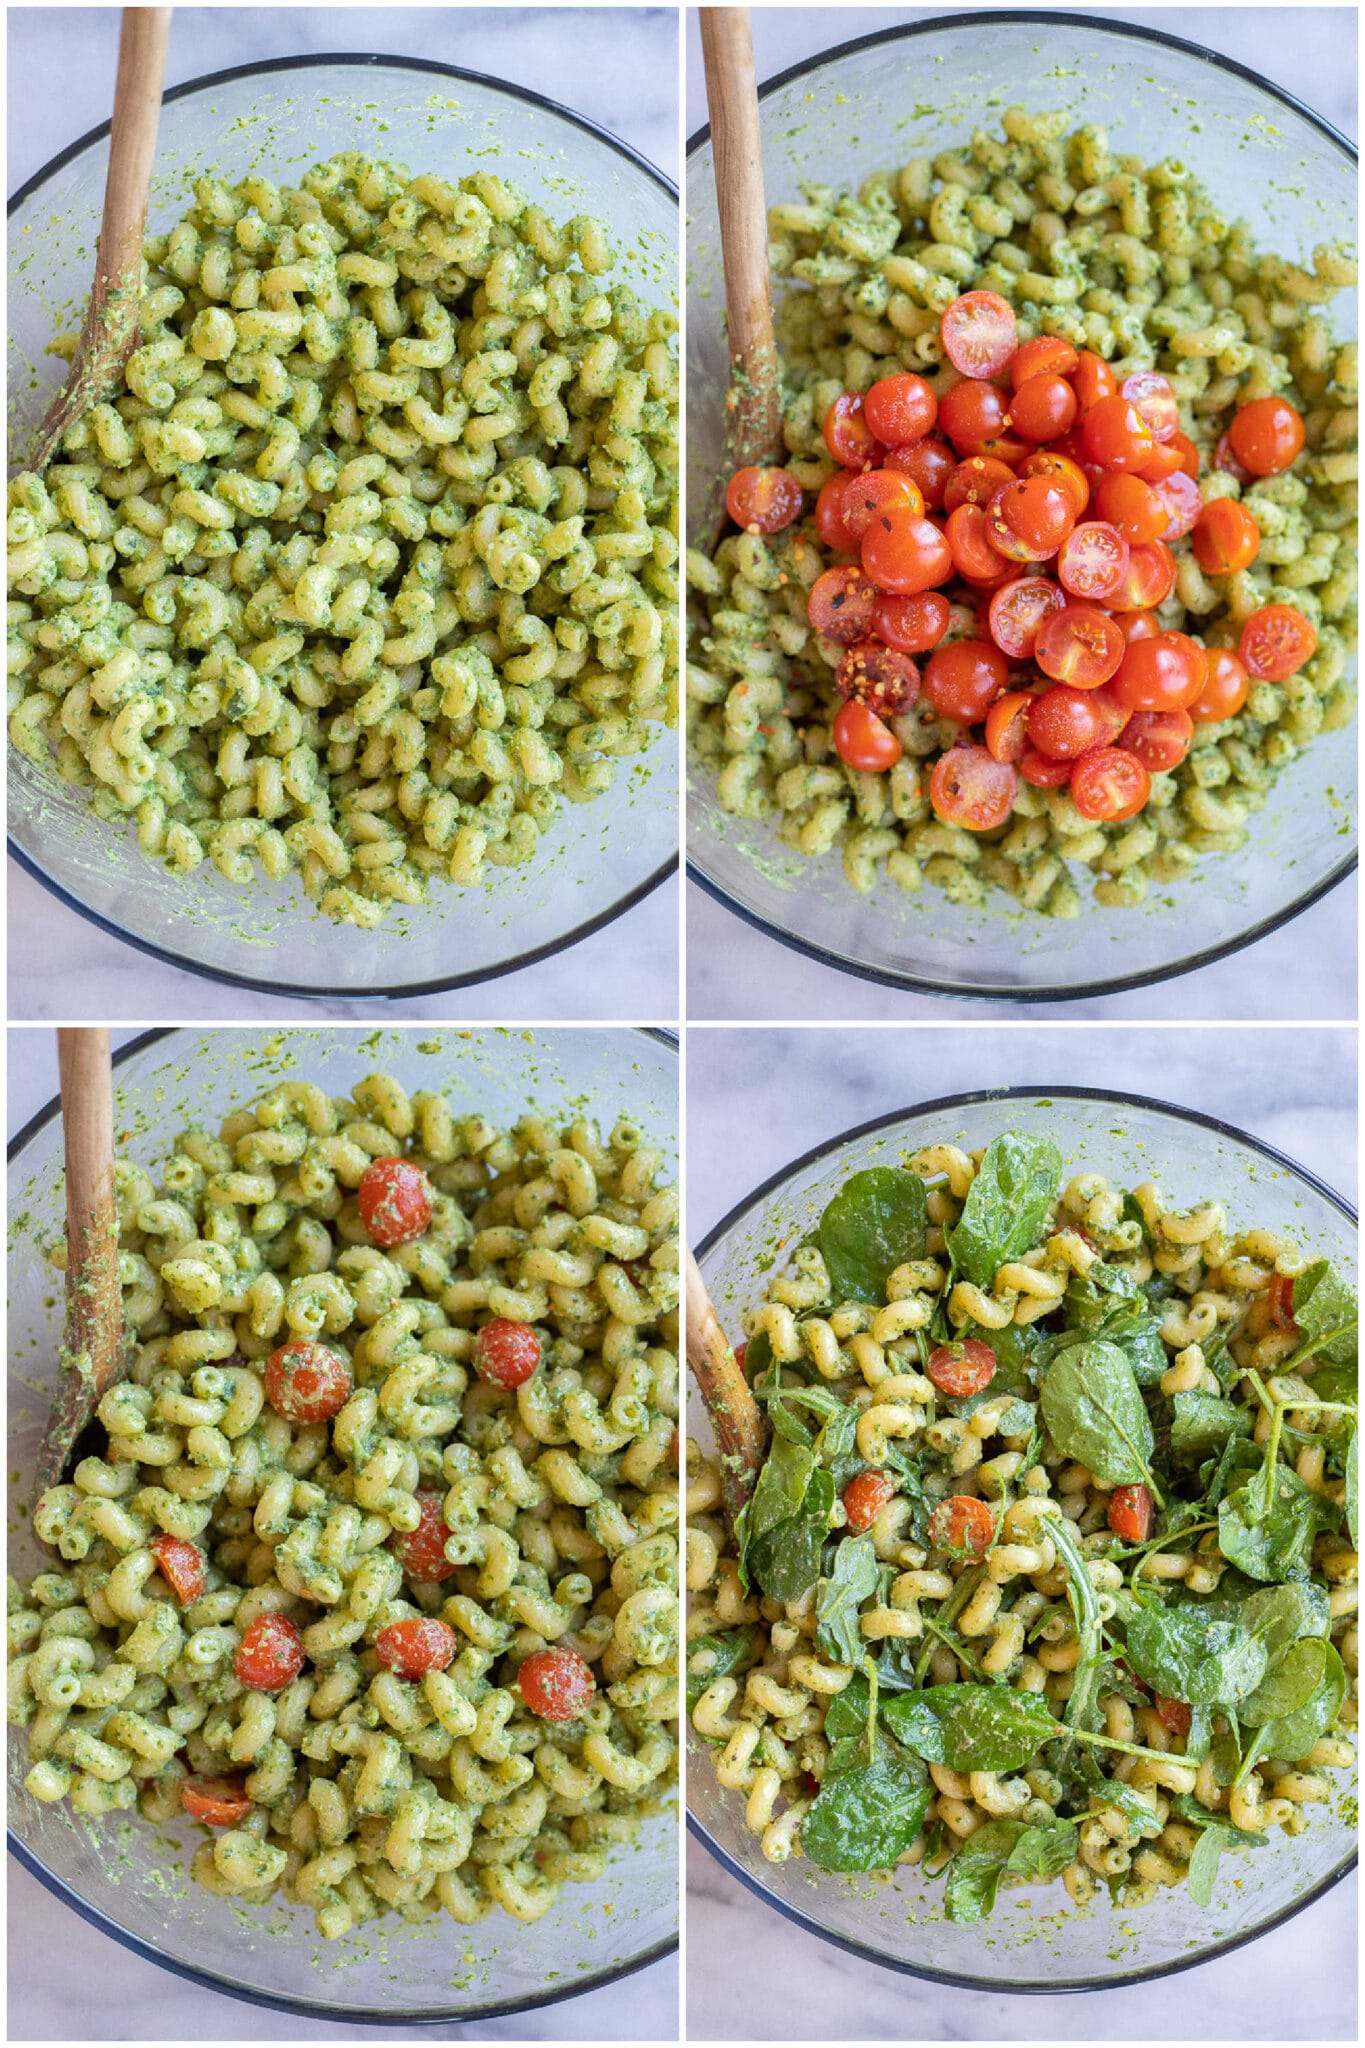 Cherry Tomatoes and spring greens being mixed into the avocado pesto pasta recipe